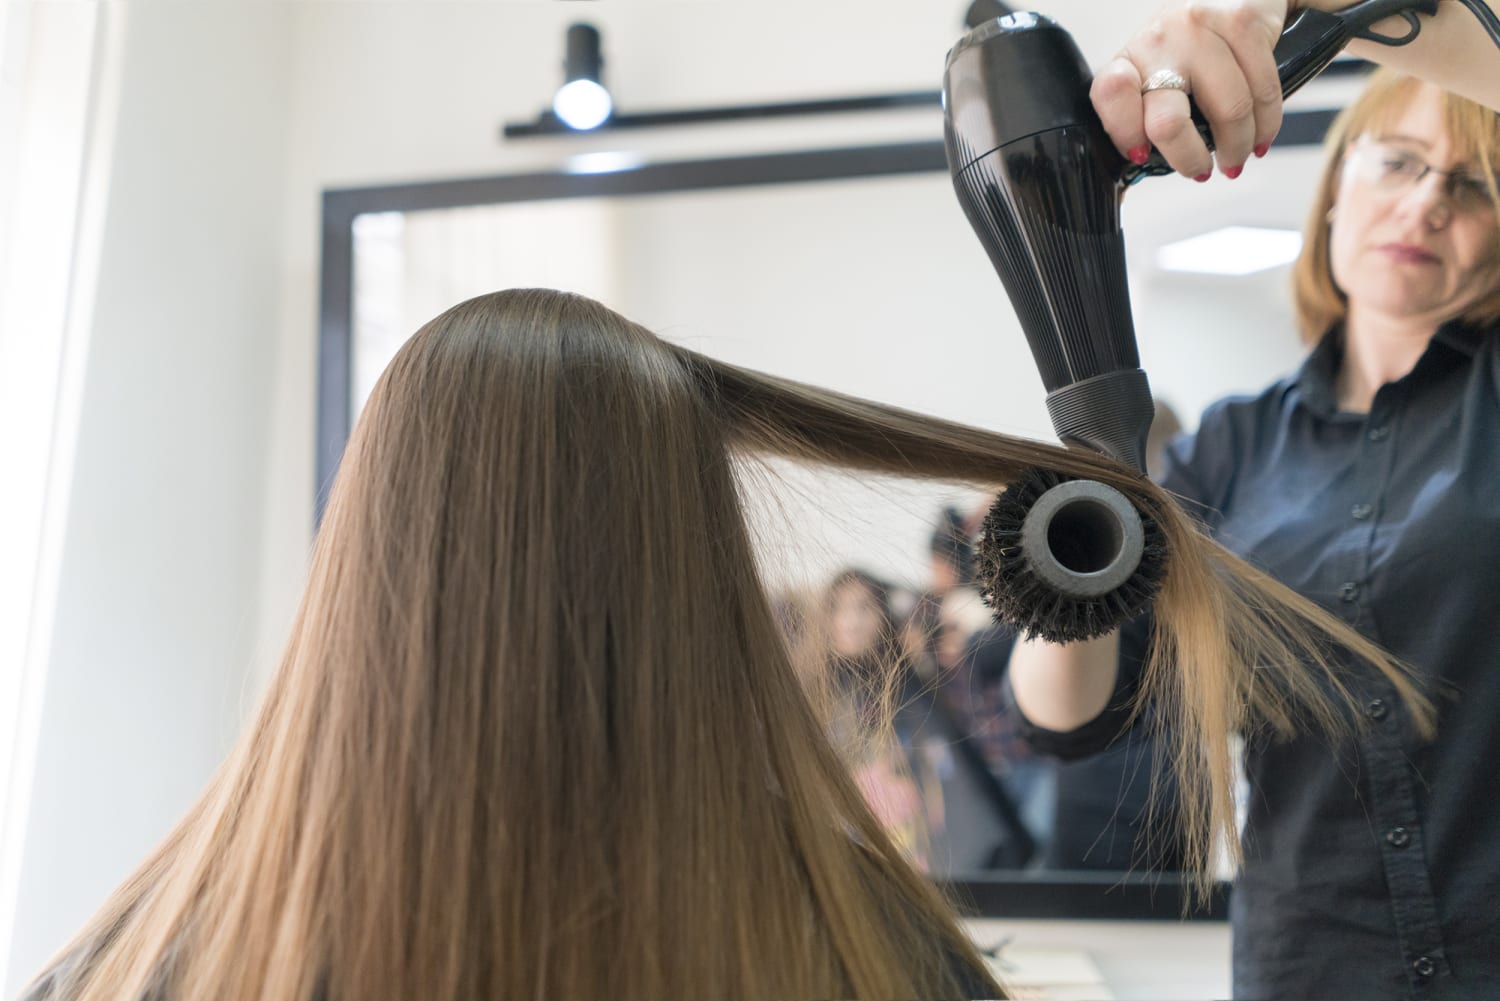 Do blow dryers spread germs? Some salons won't offer blowouts